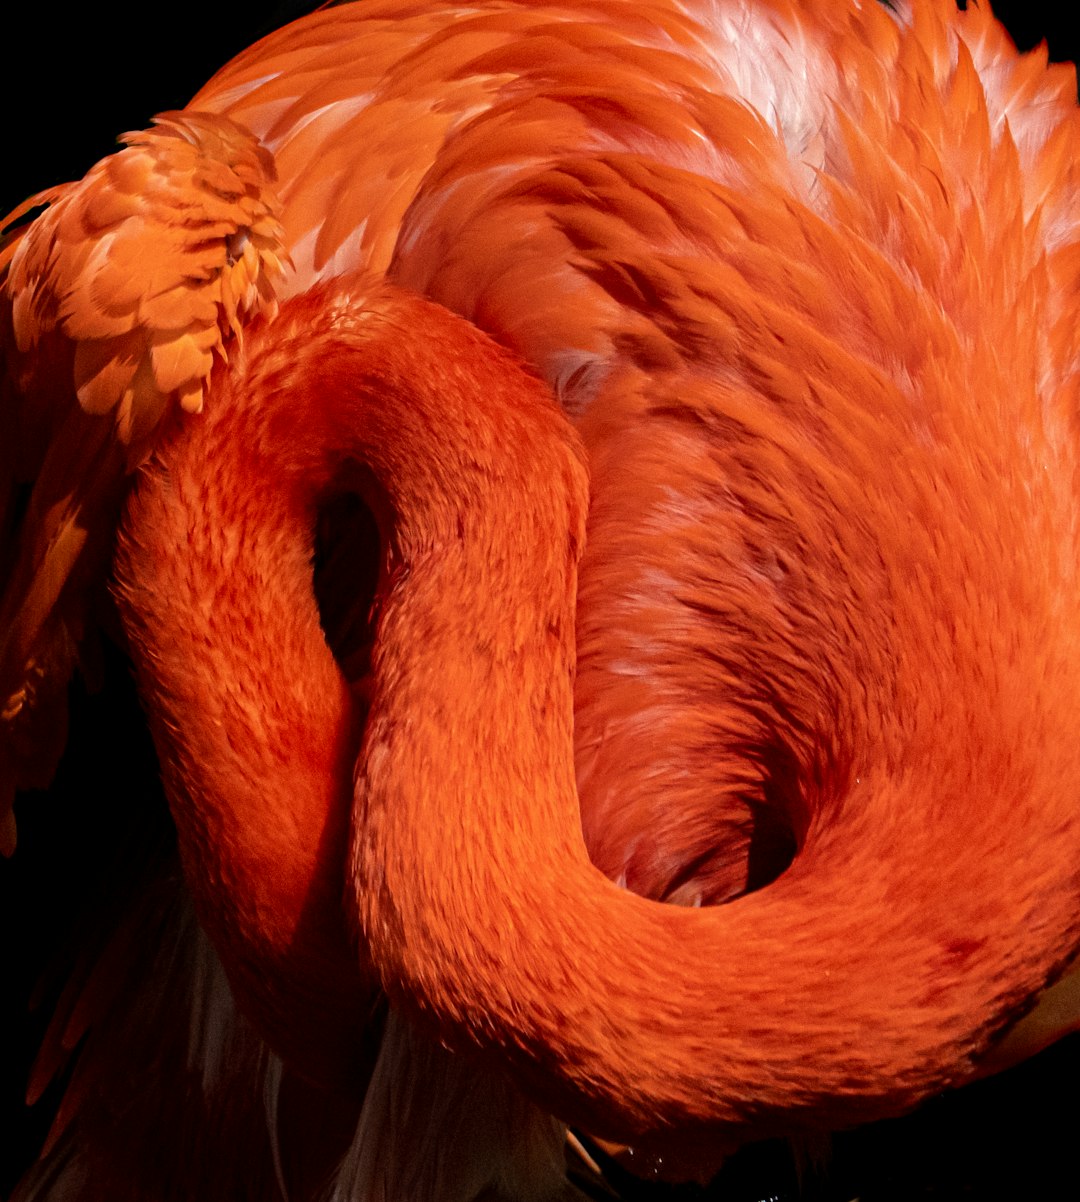 orange bird feather in close up photography